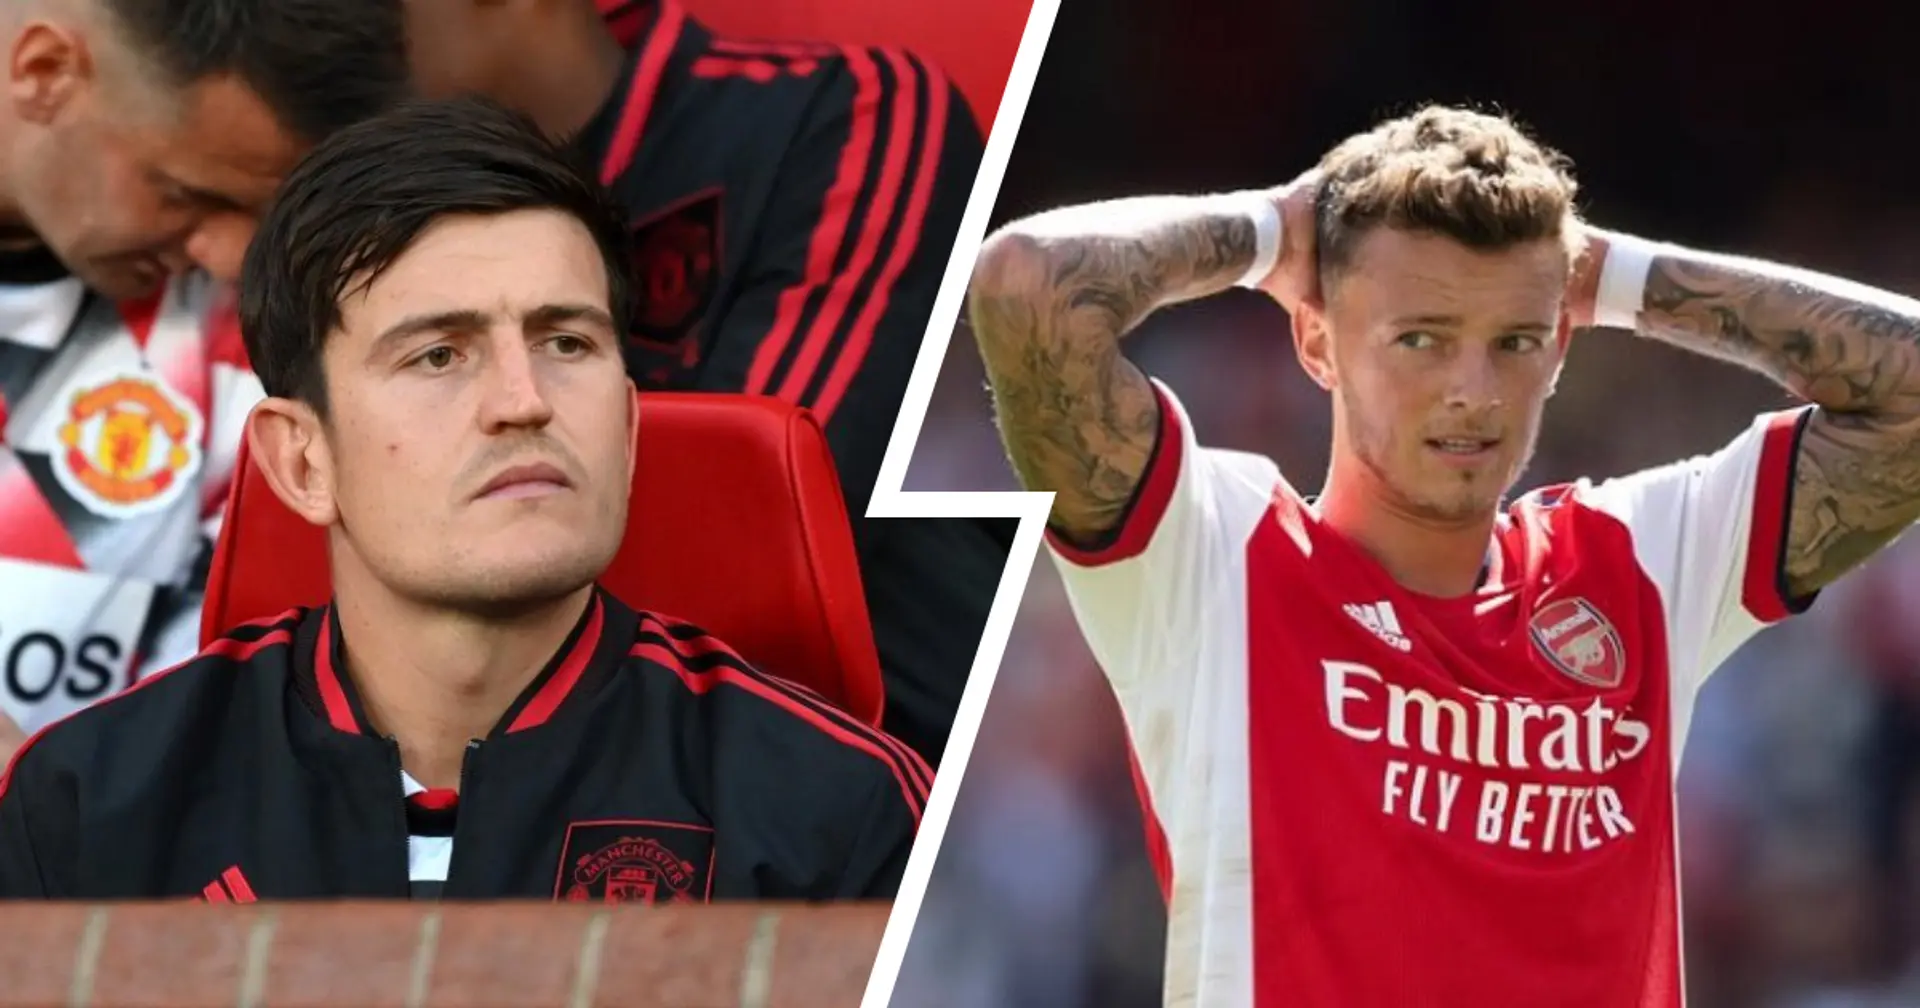 'F***ing embarrassing decision making': Arsenal can't believe Maguire was selected ahead of White for England